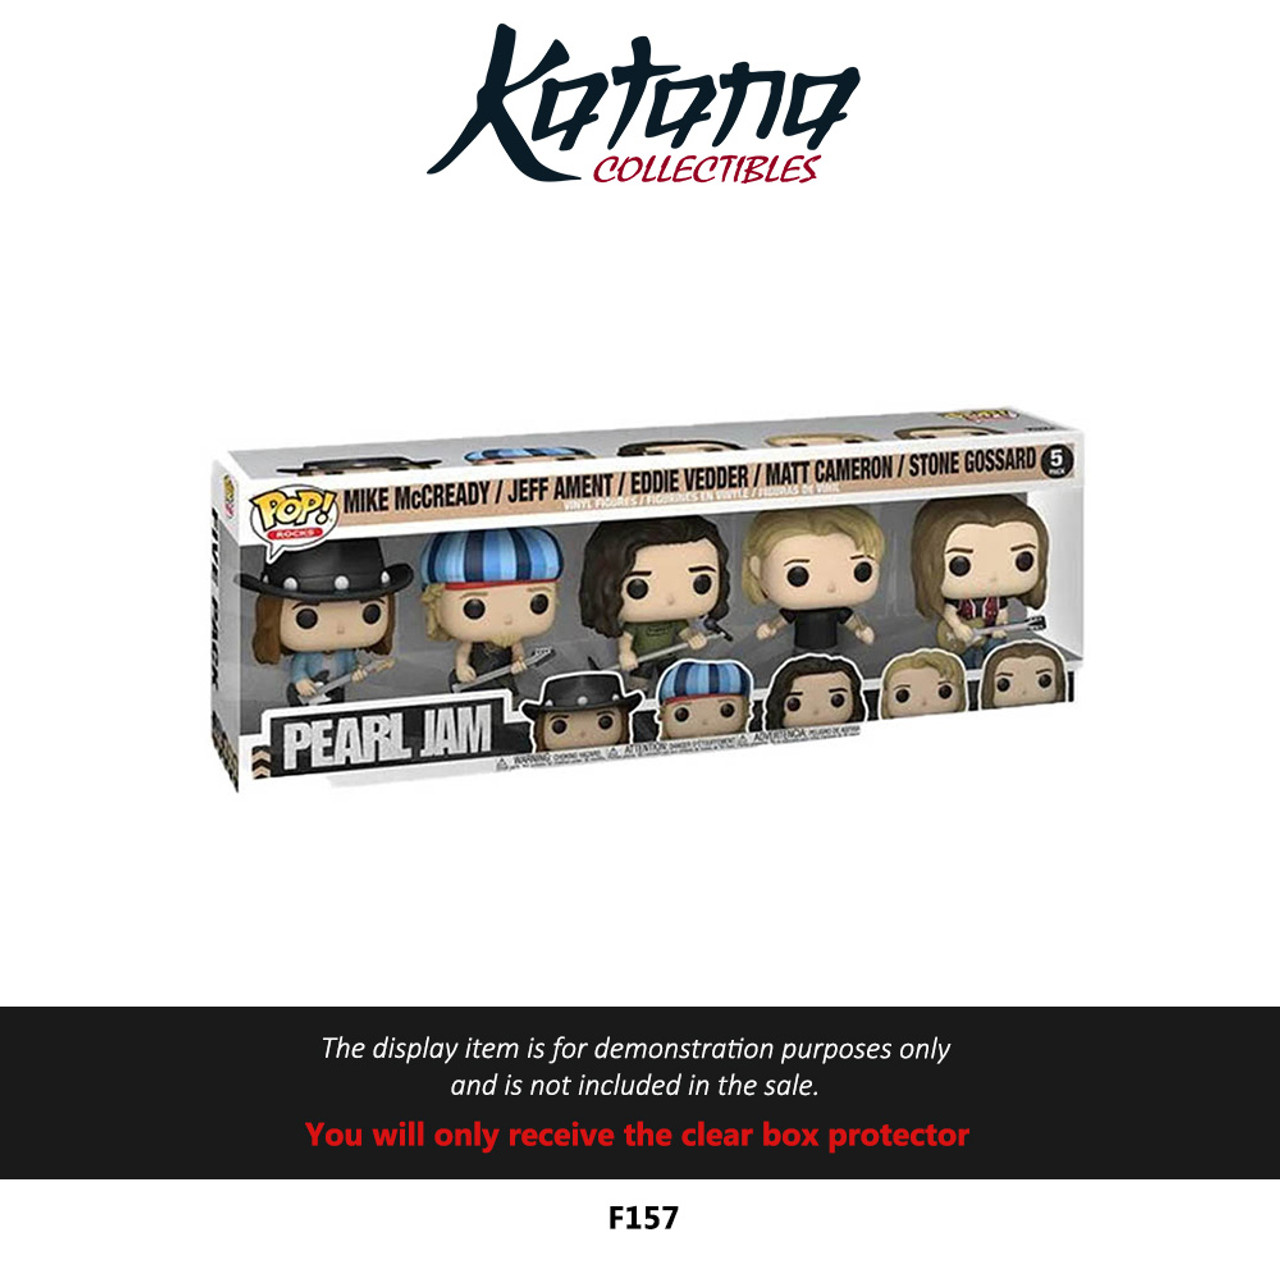 Katana Collectibles Protector For Funko POP 5-pack Standard